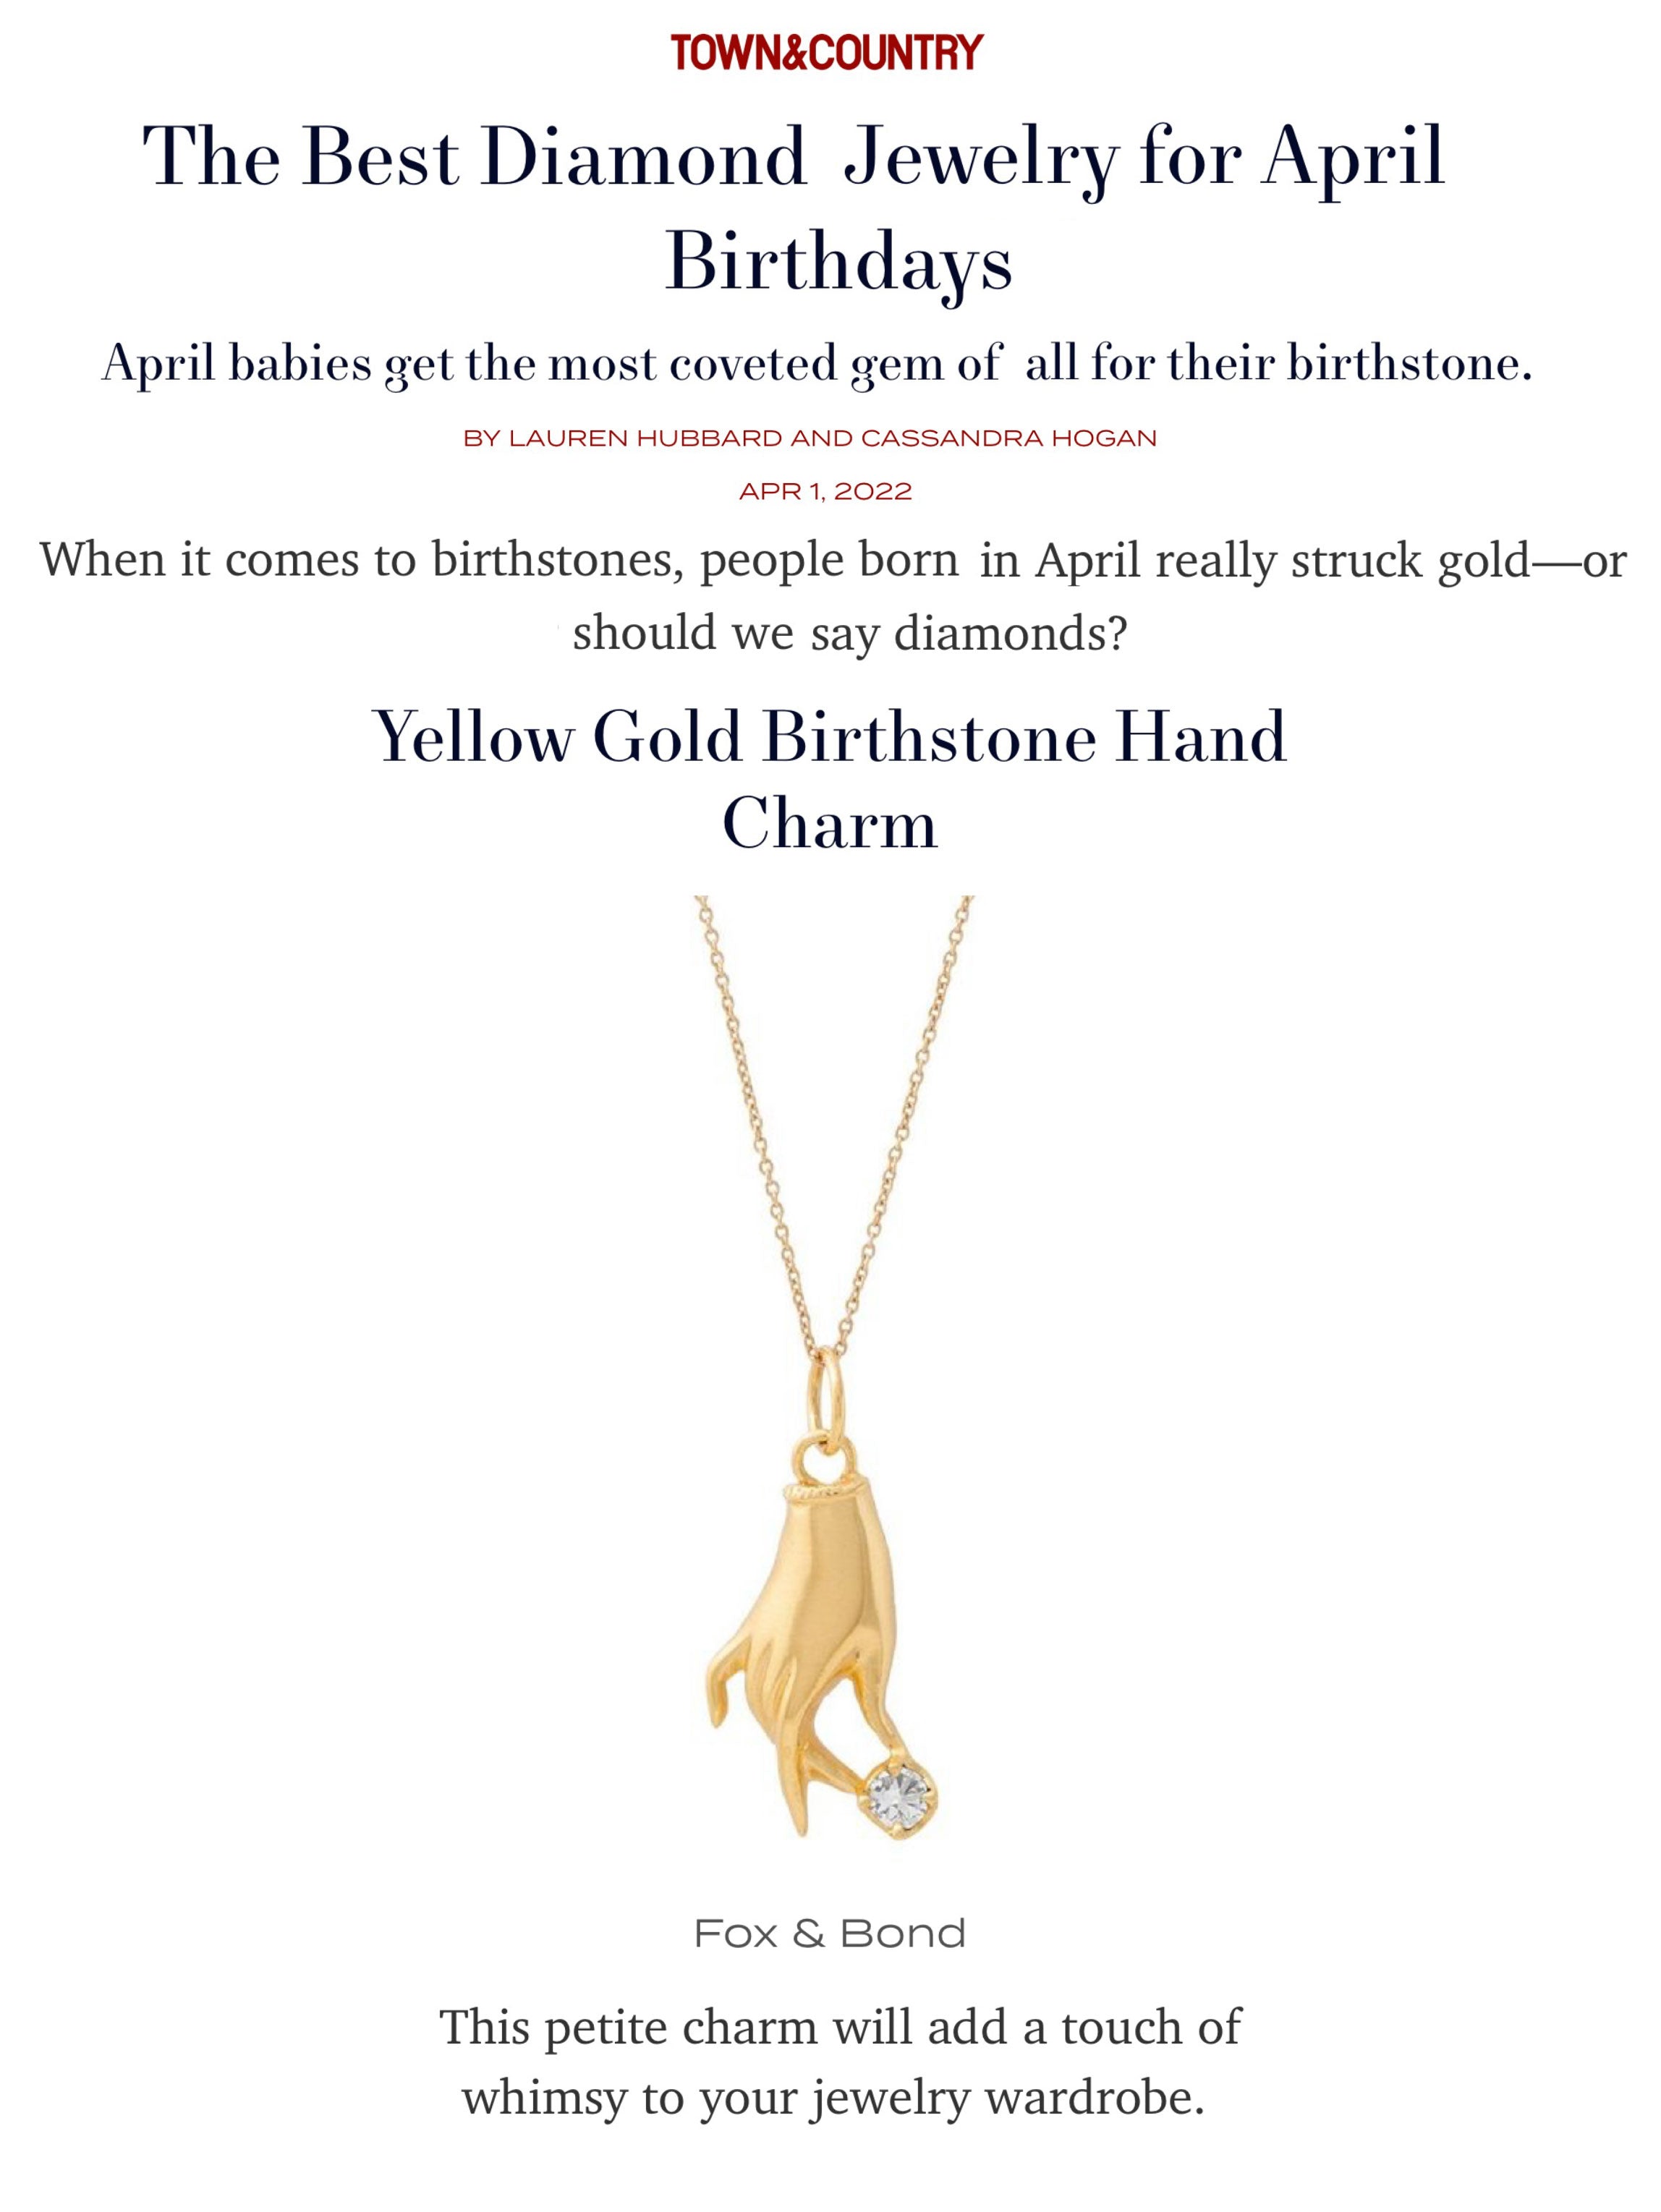 Town & Country: The Best Diamond Jewelry for April Birthdays